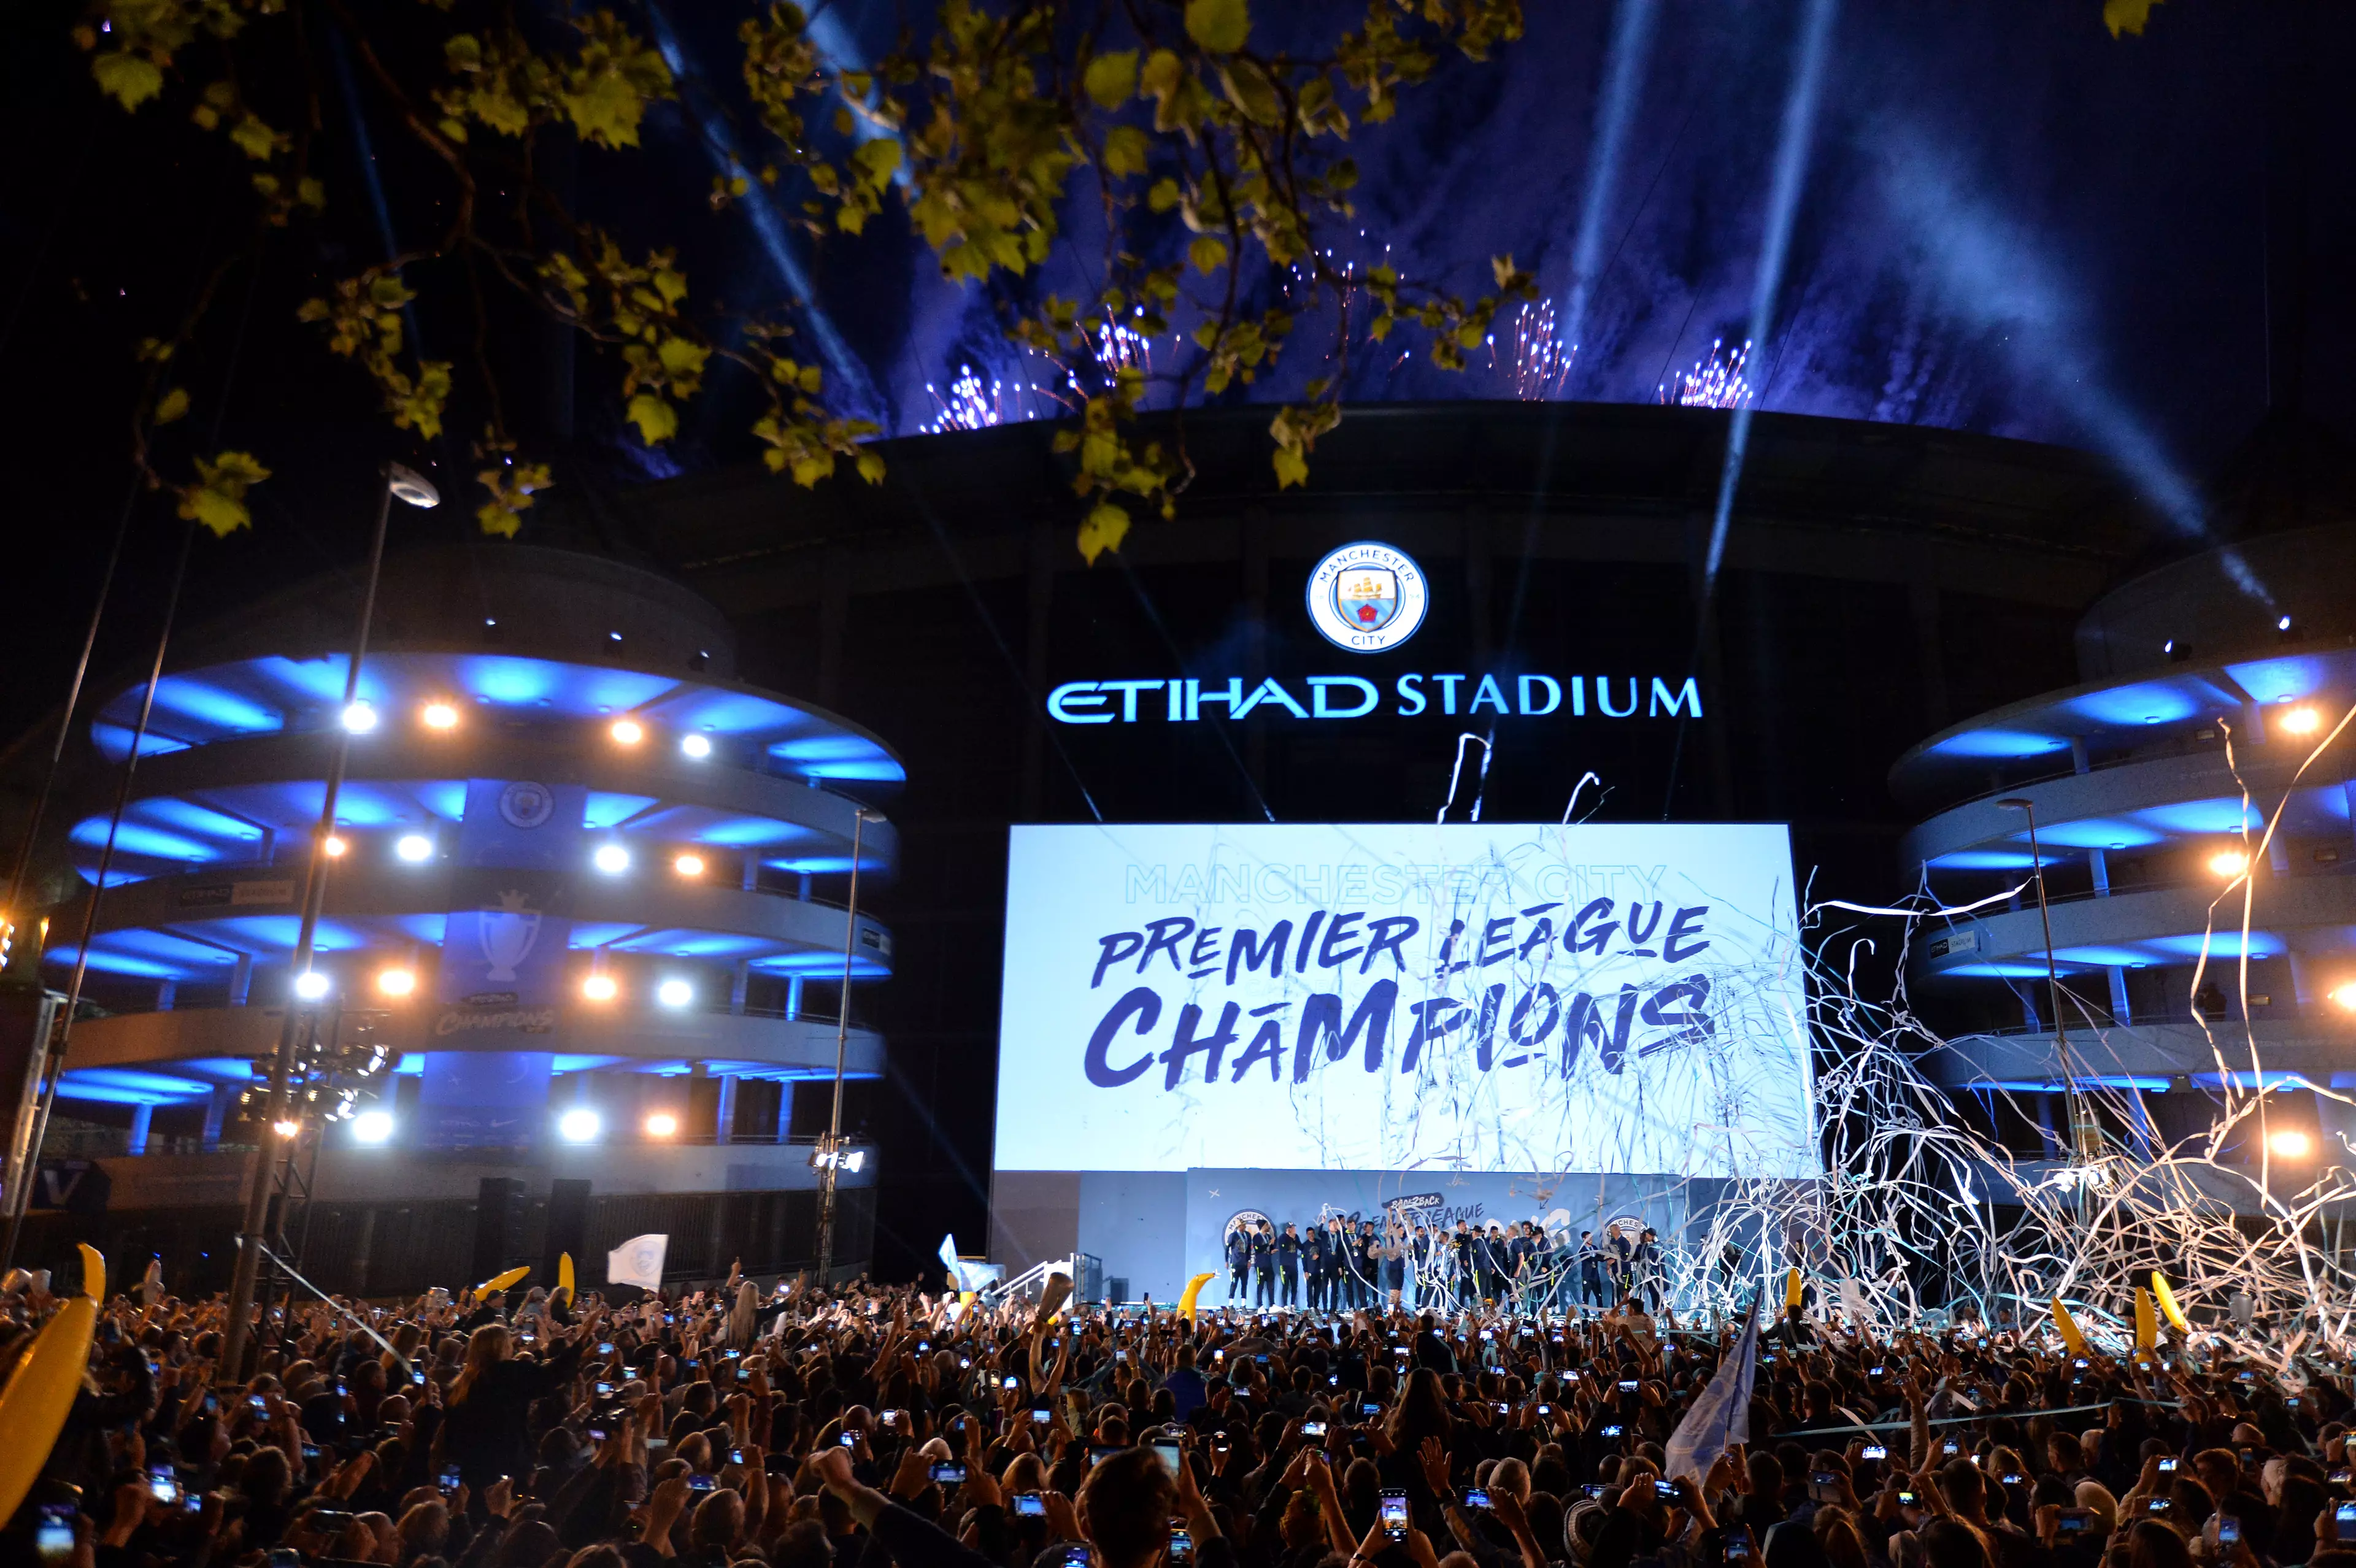 These scenes won't be seen outside of the Etihad this season. Image: PA Images